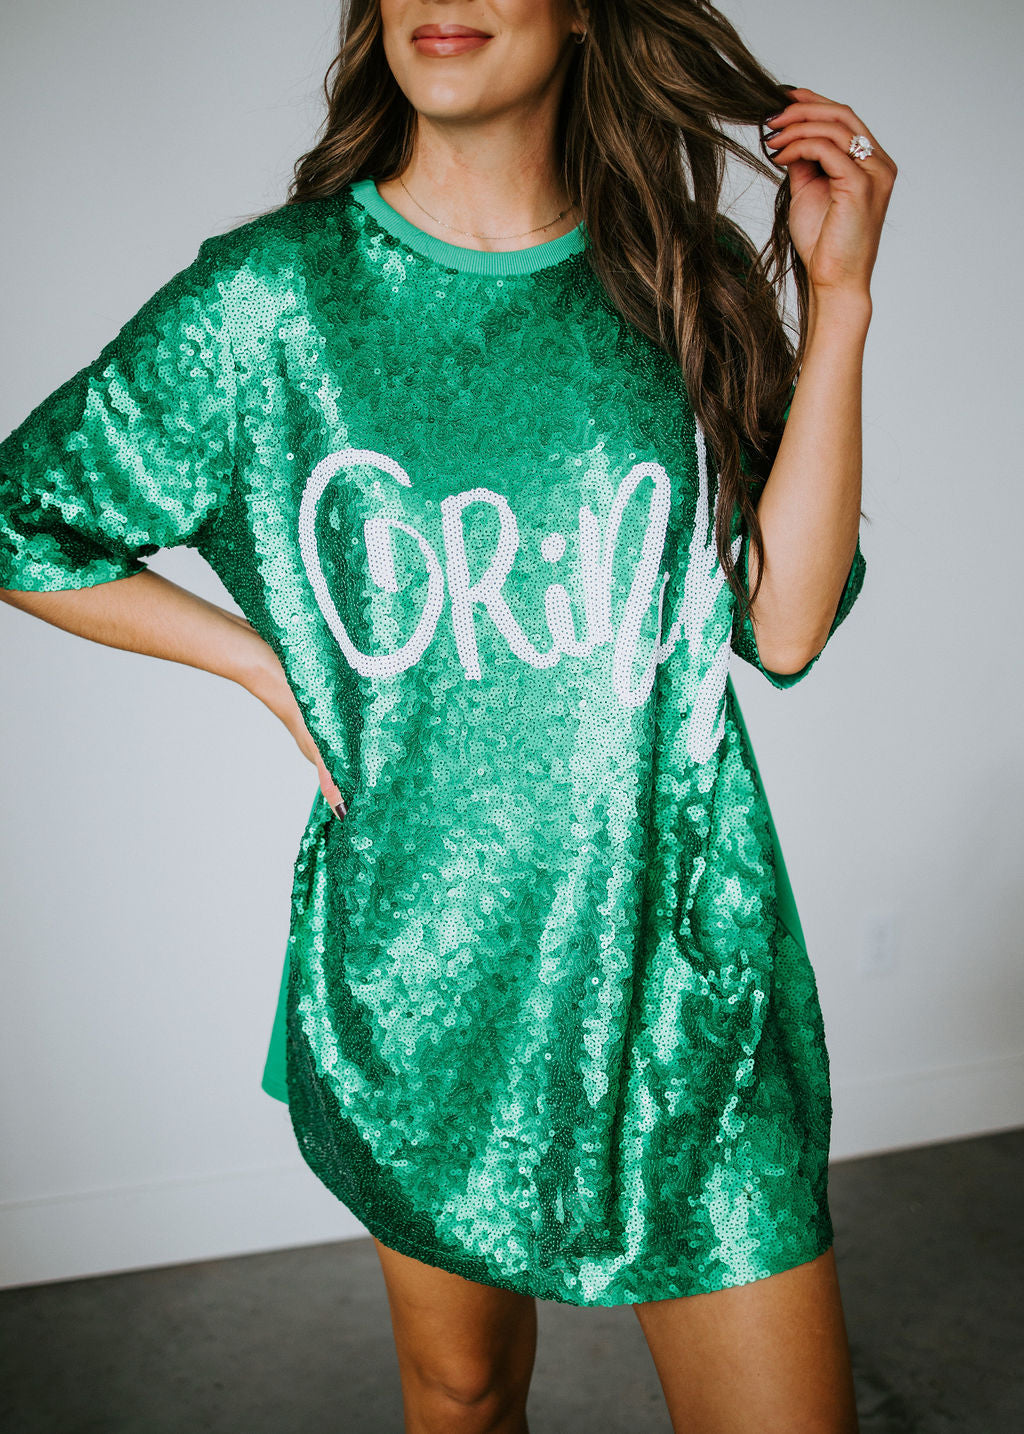 image of Grinch Sequin Dress